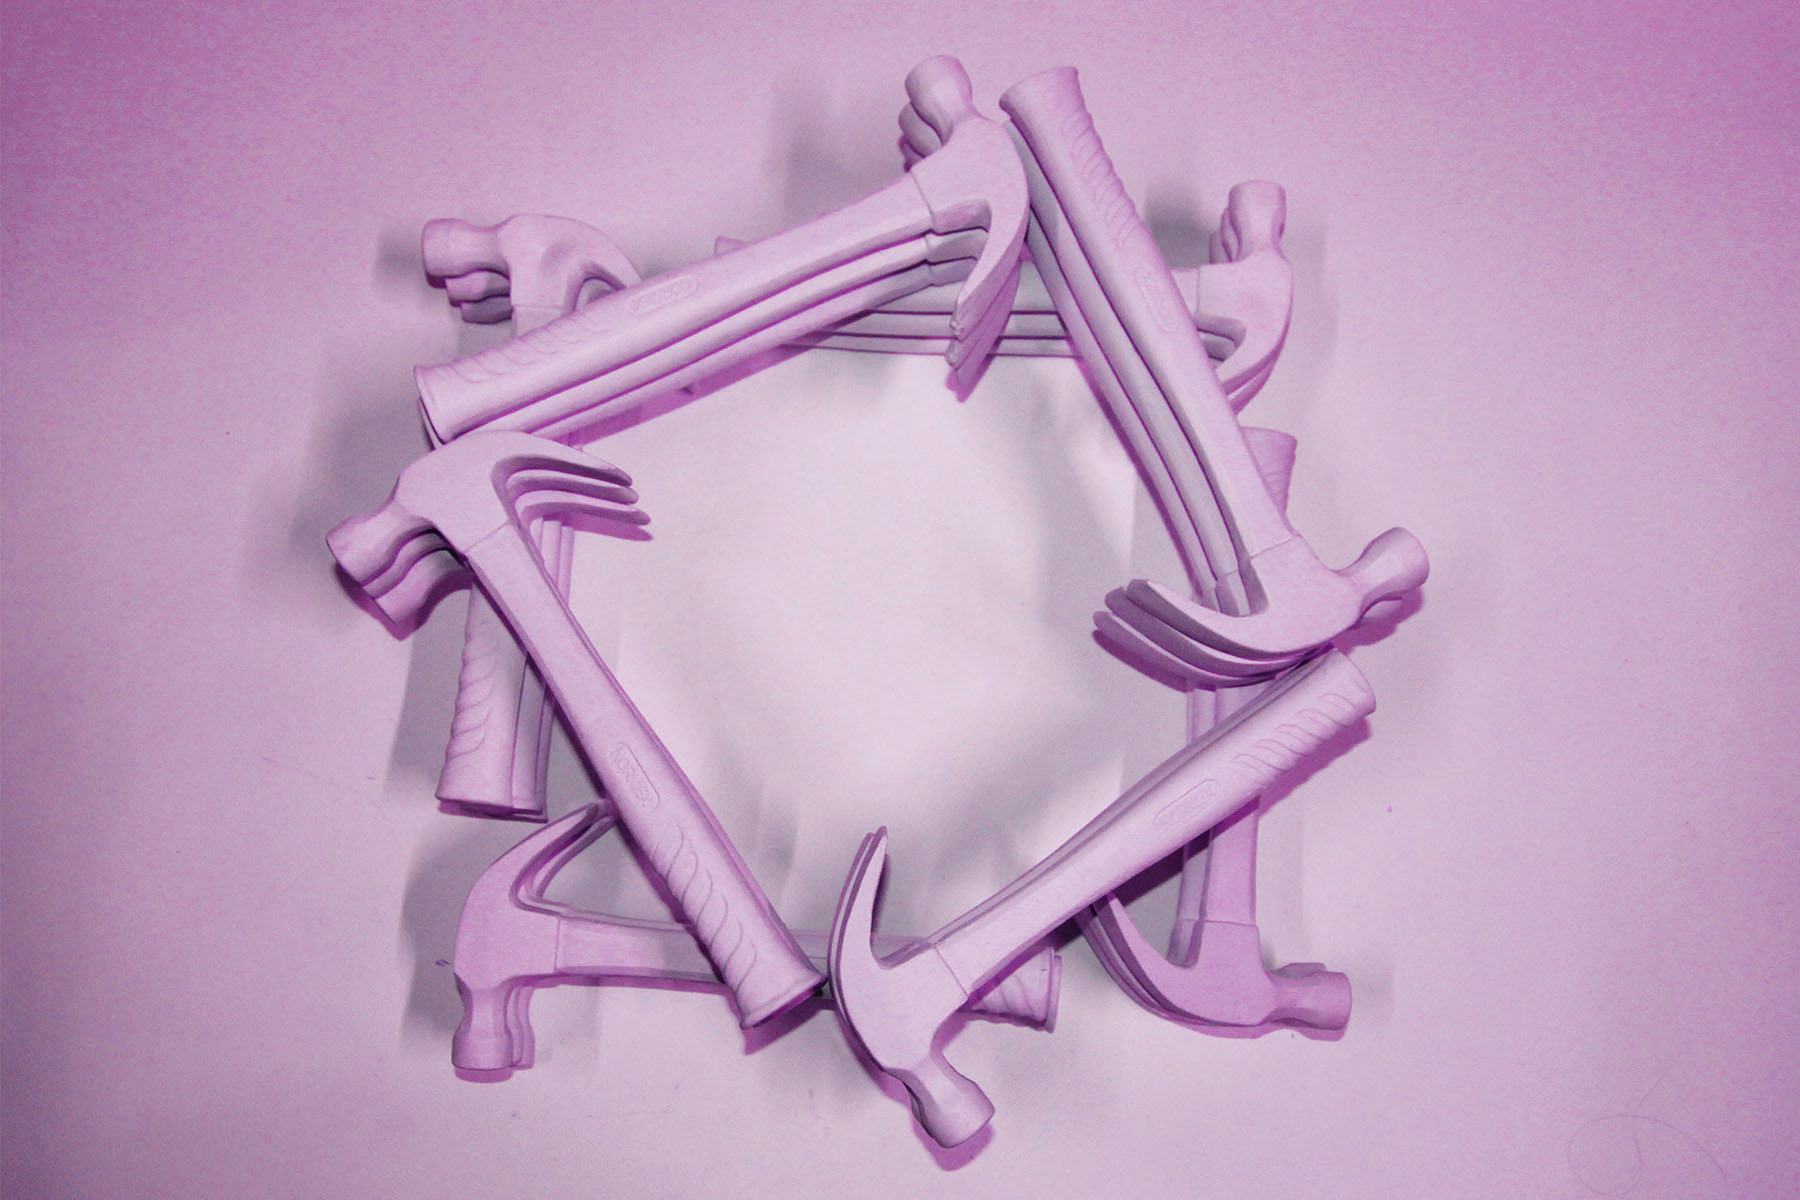 Structure in Pink I by Stacey Mulligan, Digital Photograph.